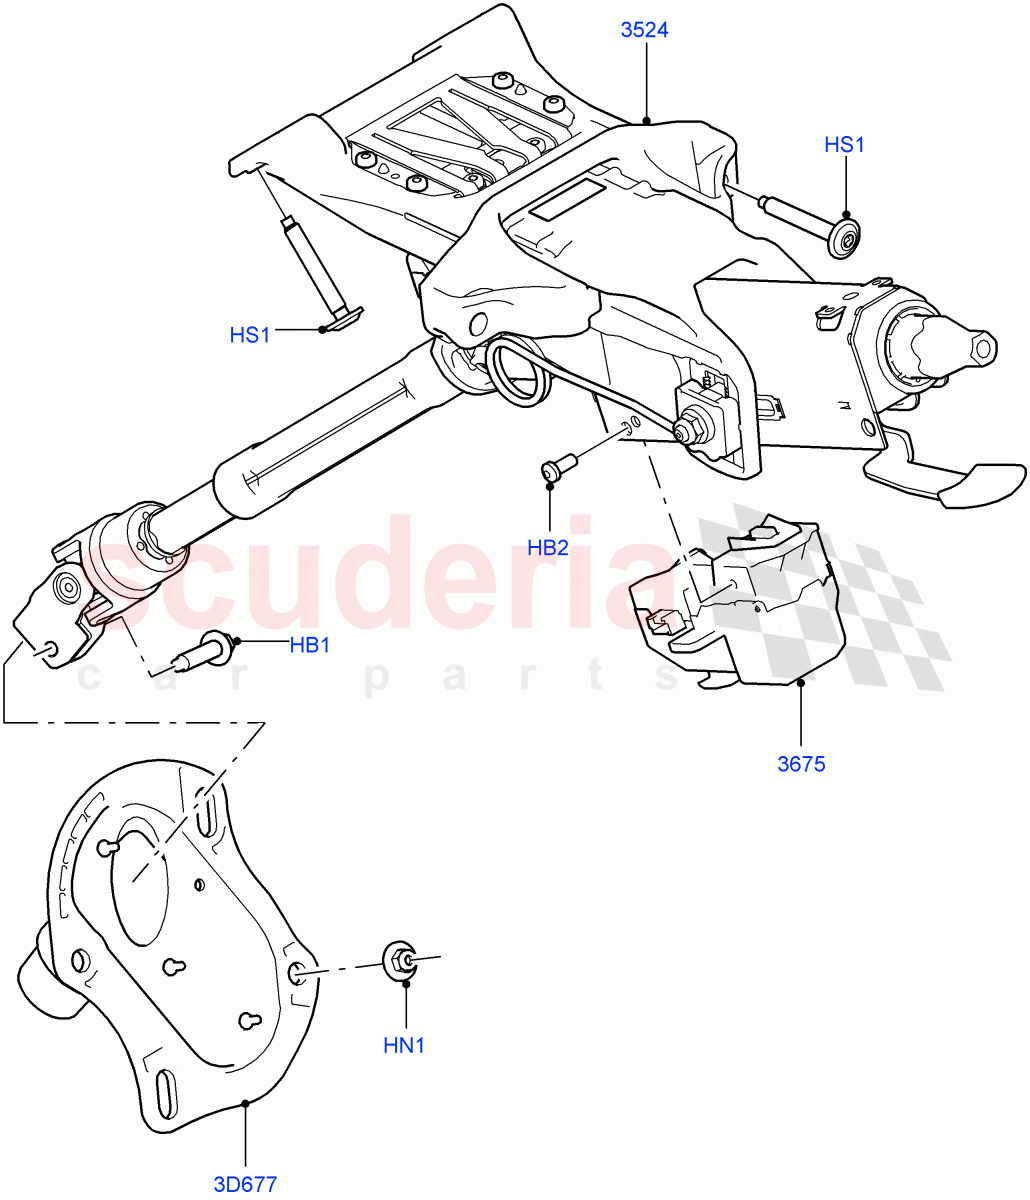 Steering Column(Halewood (UK)) of Land Rover Land Rover Discovery Sport (2015+) [2.0 Turbo Diesel]